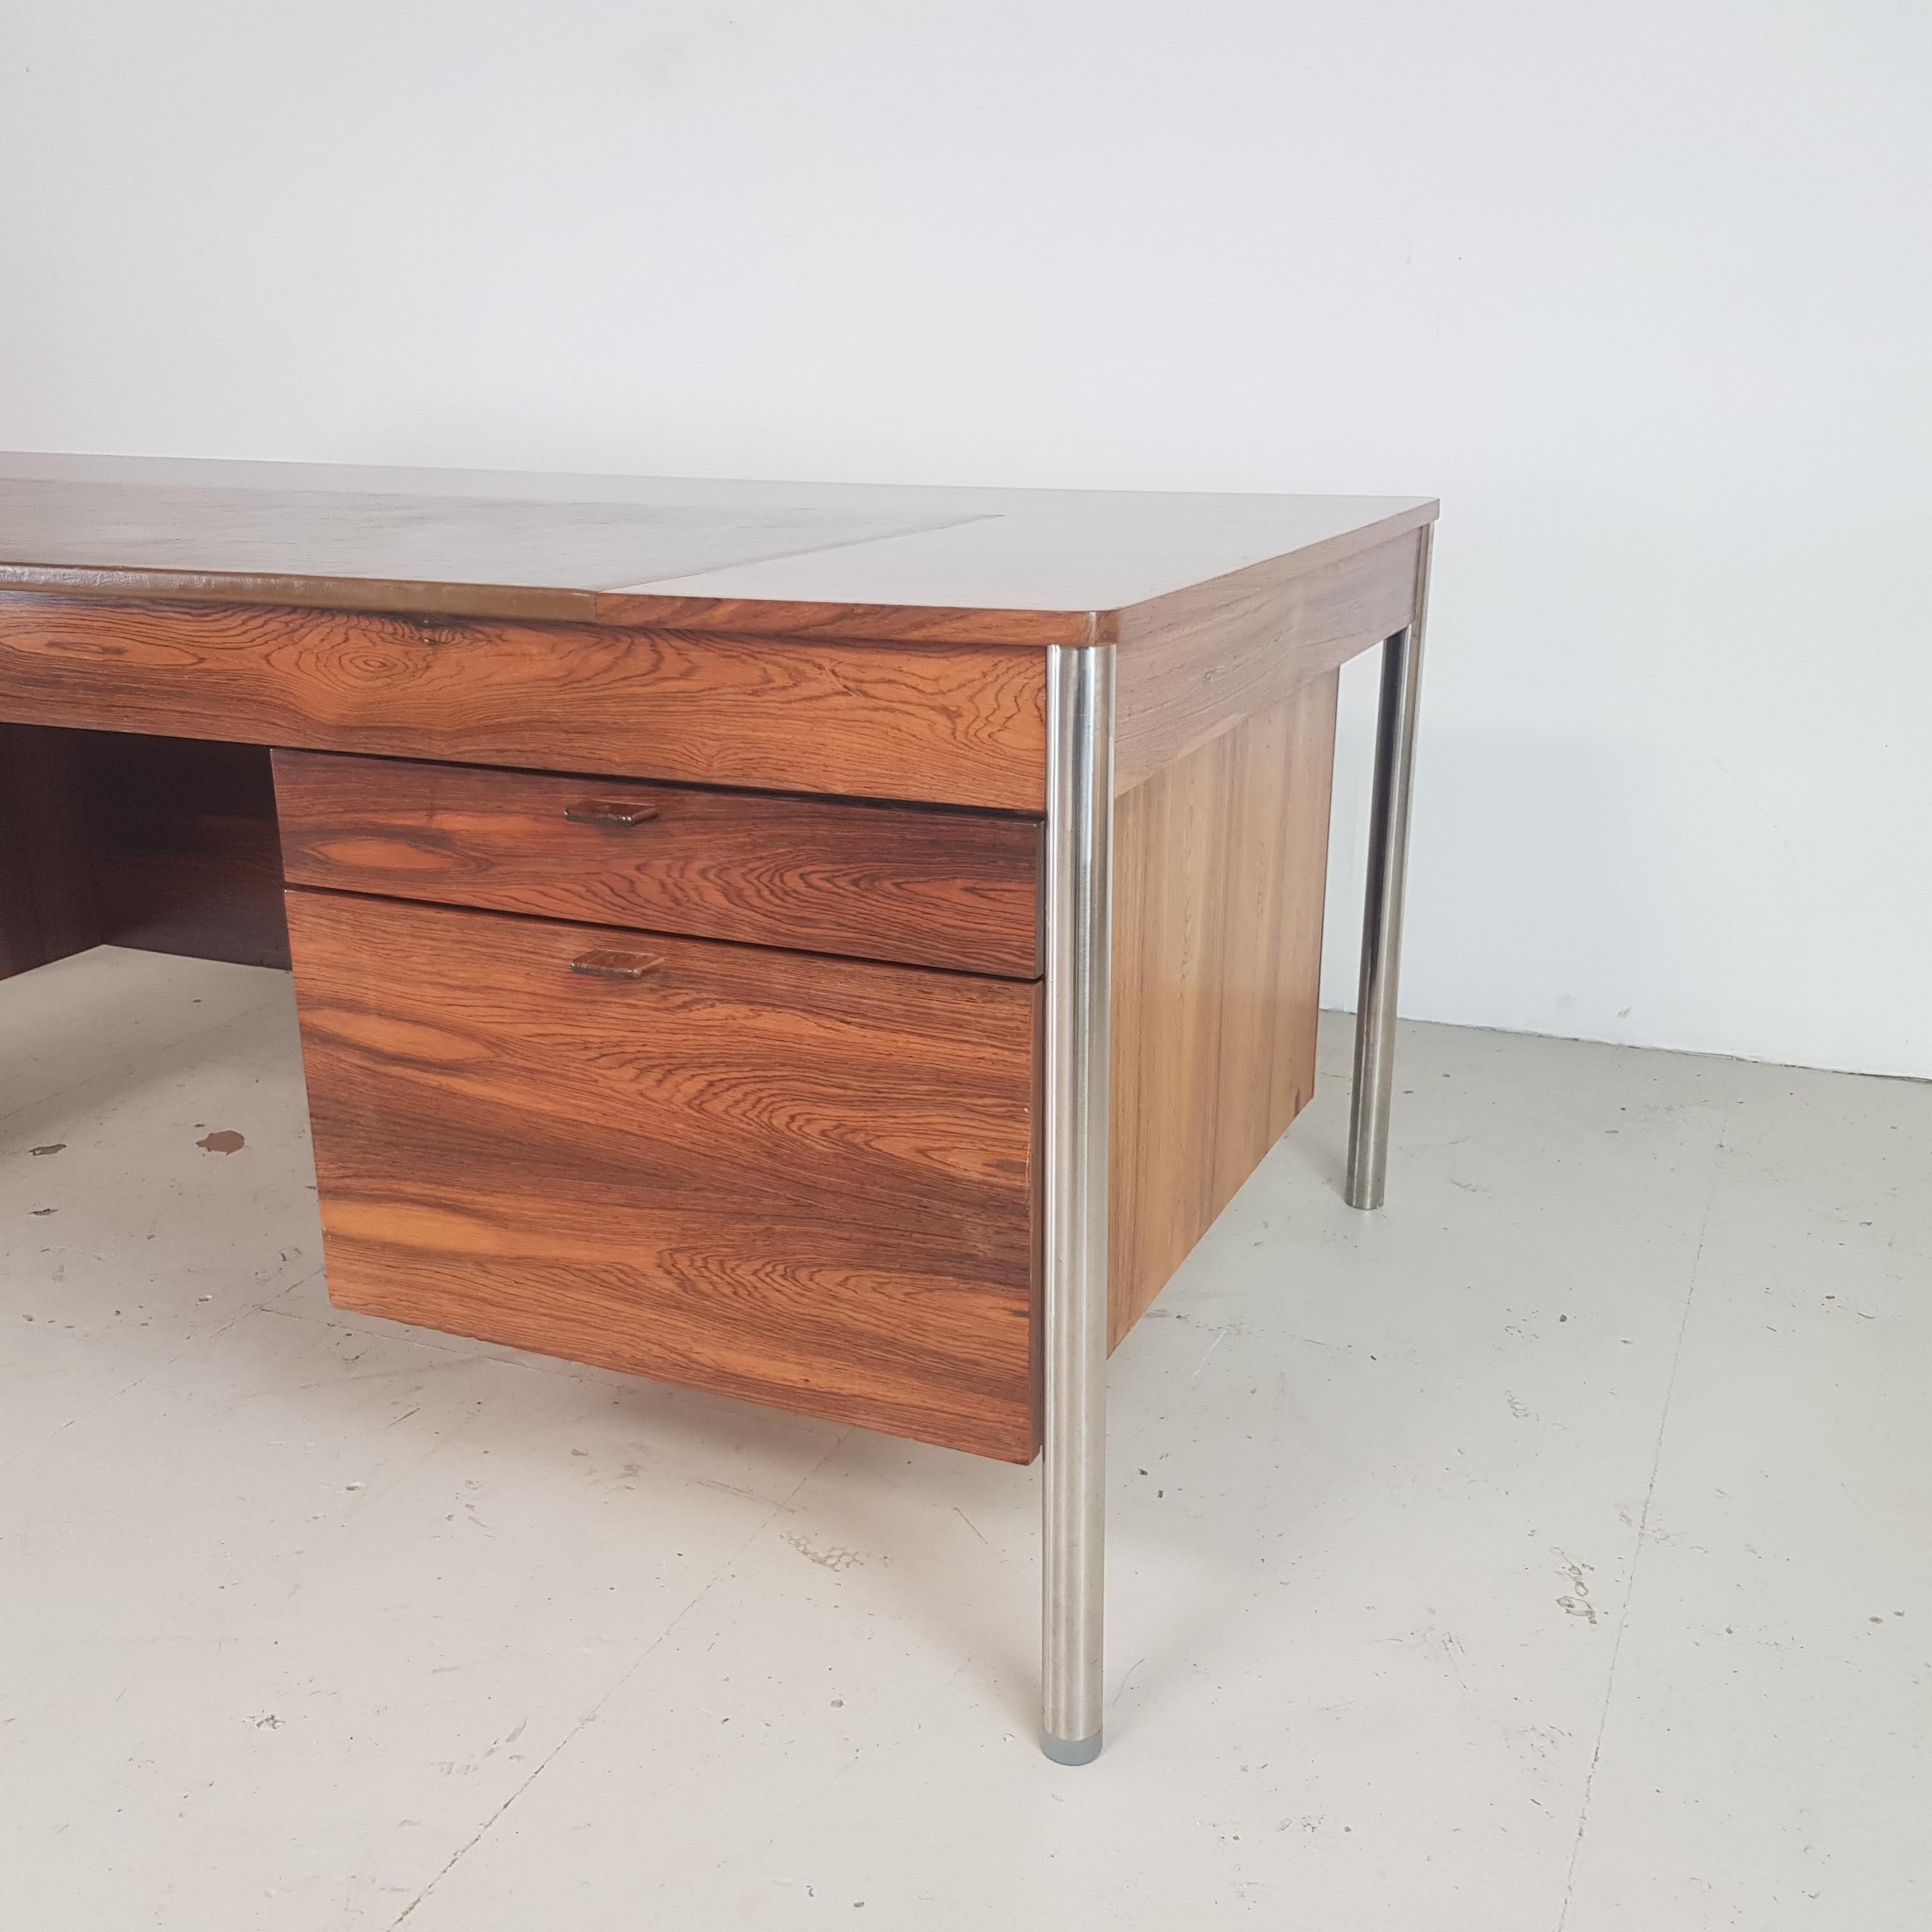 1960s Rosewood Desk by Robert Heritage for Archie Shine In Good Condition In Lewes, East Sussex